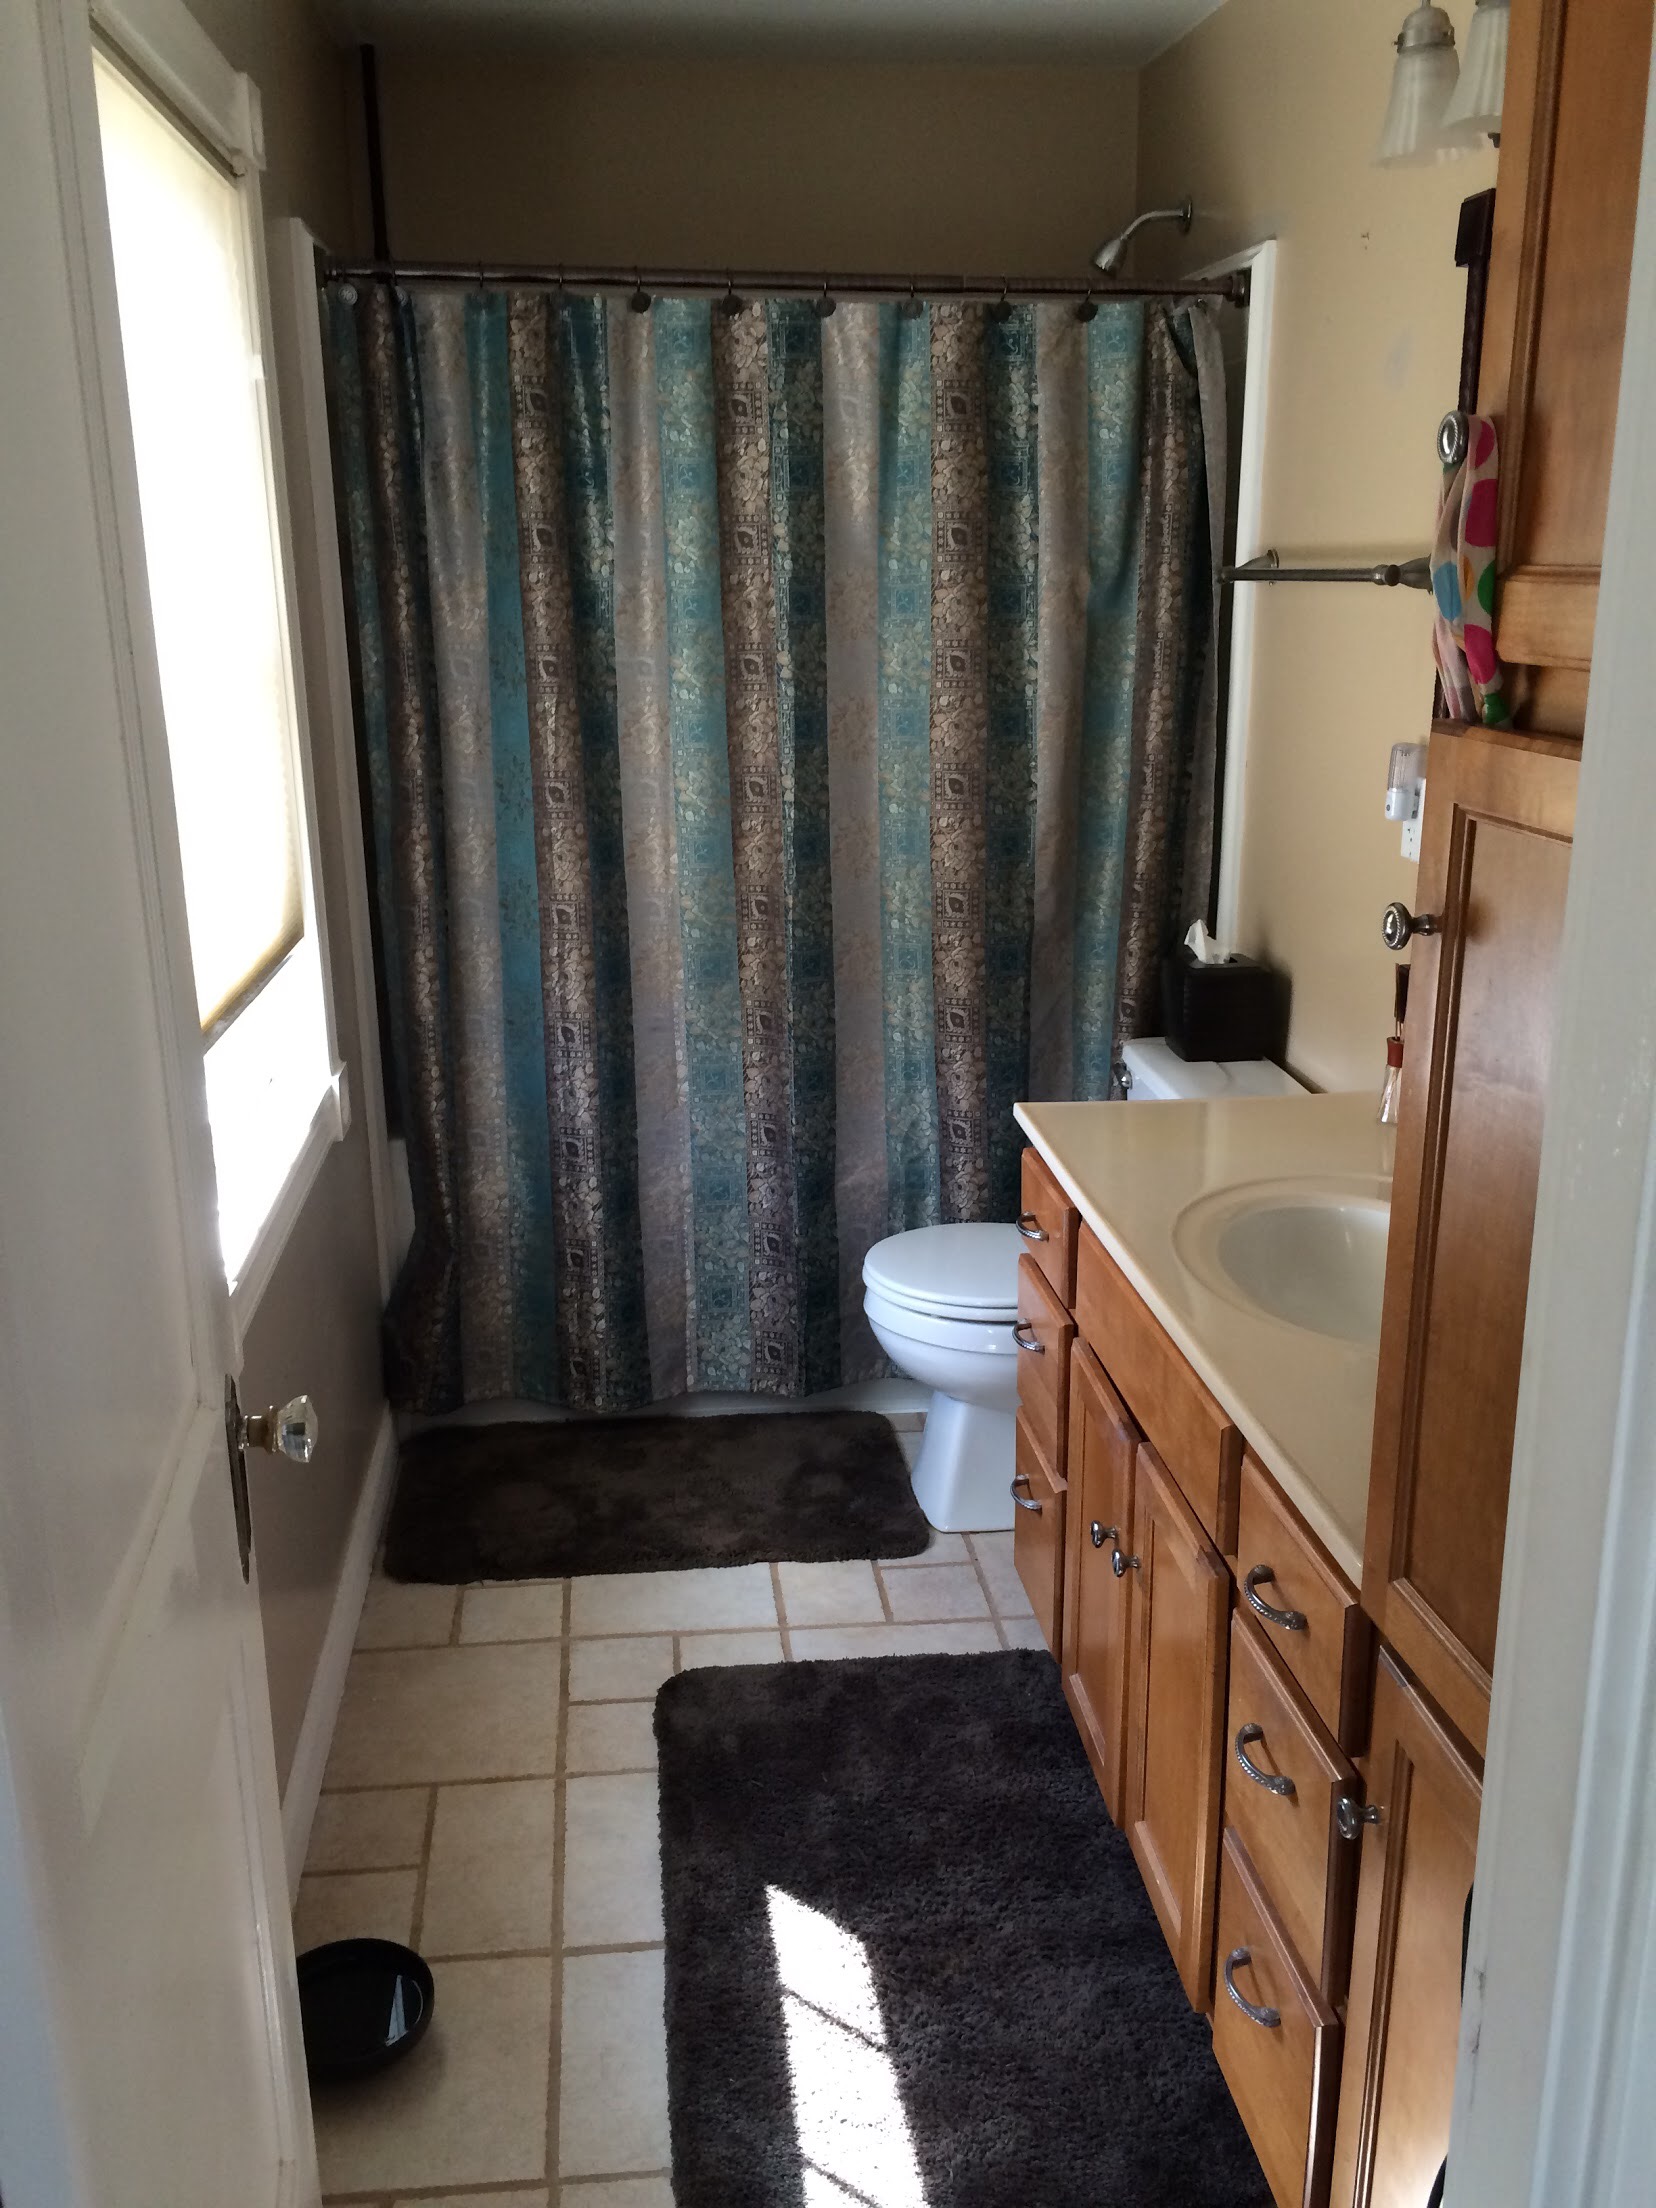 Bathroom Reno - Midwest In Style